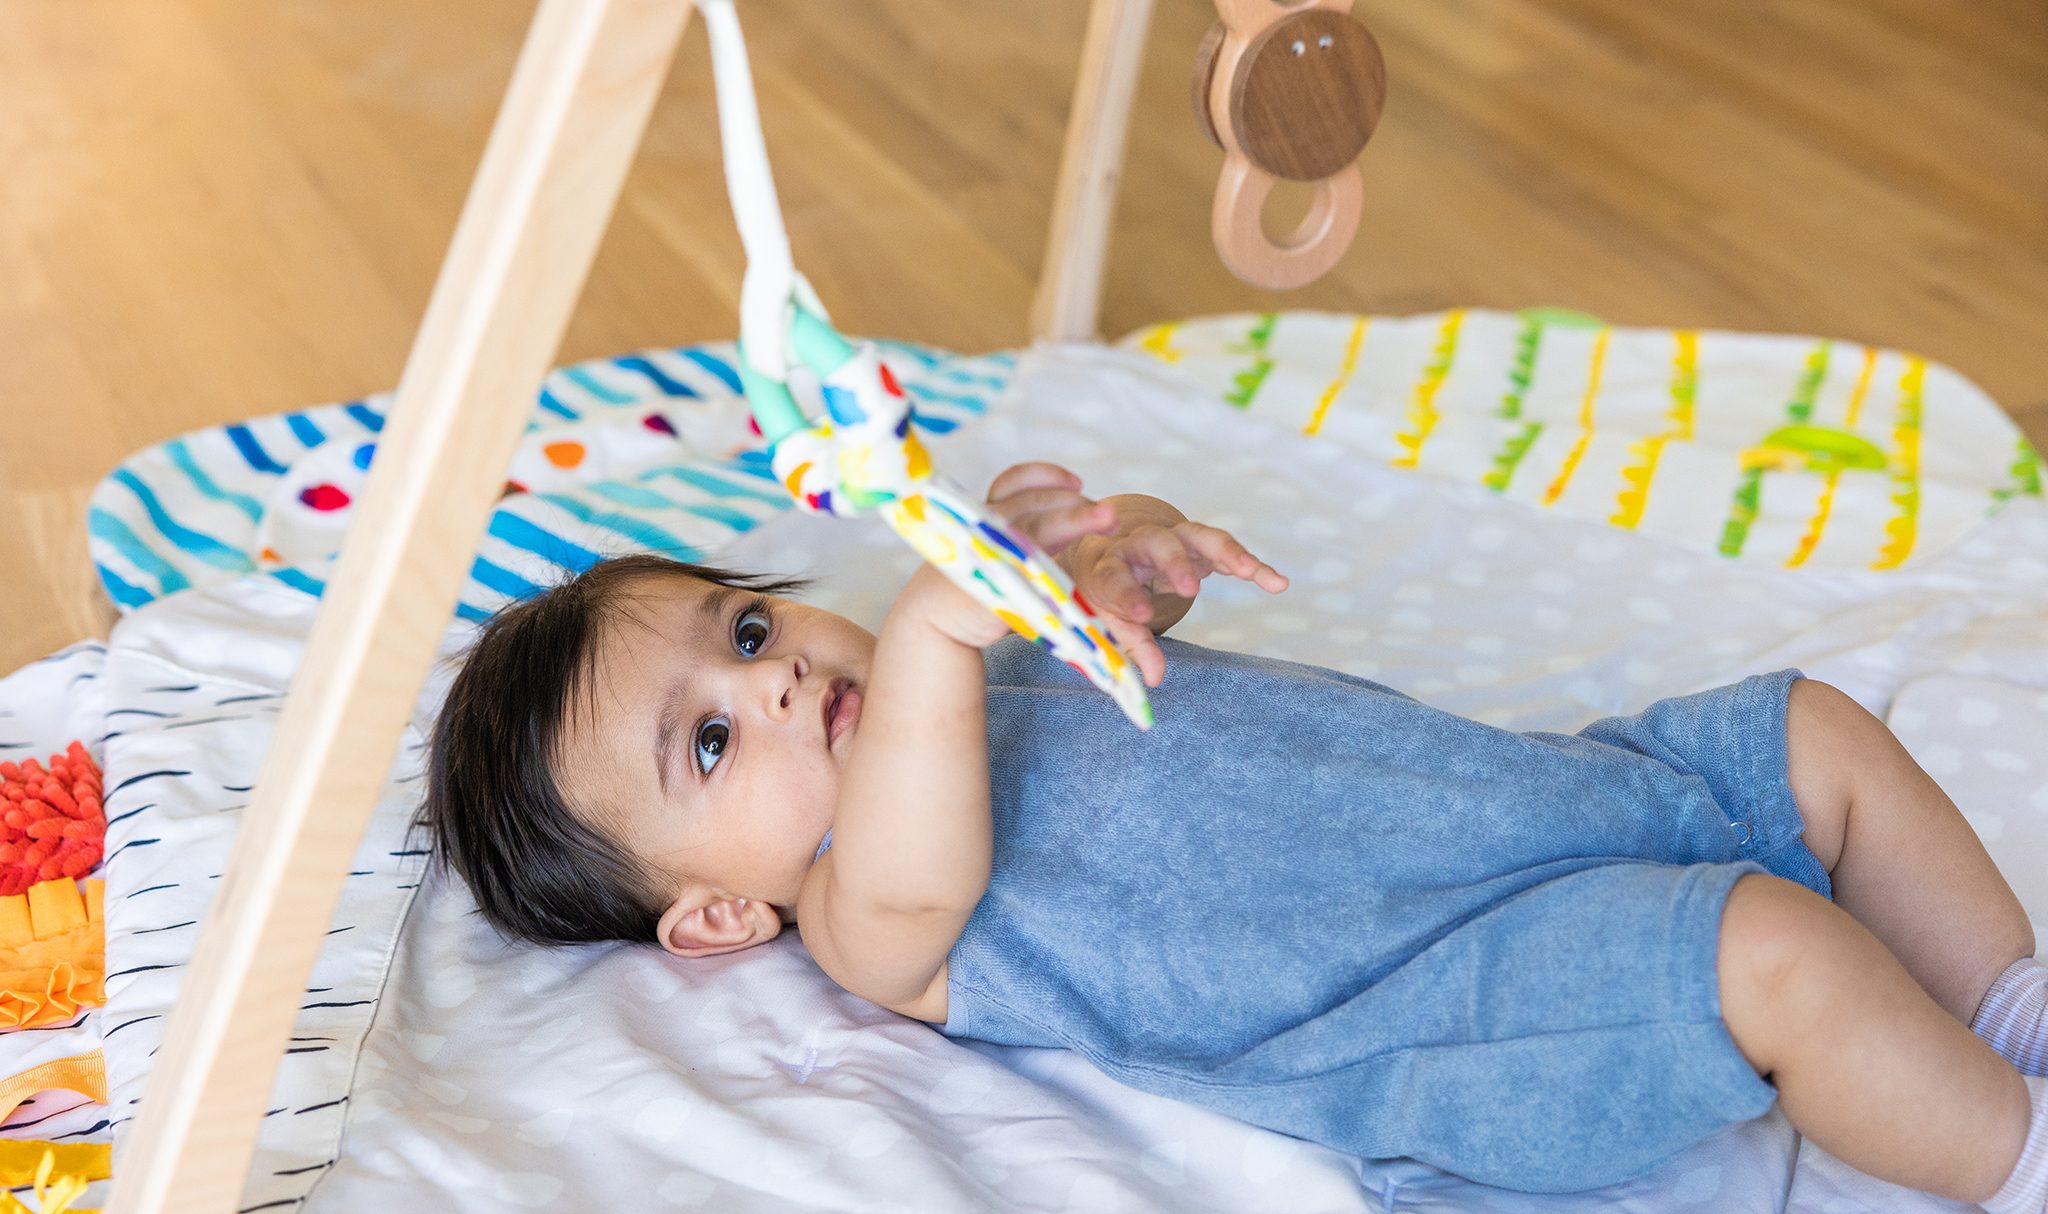 Your 4-month-old baby's cognitive development